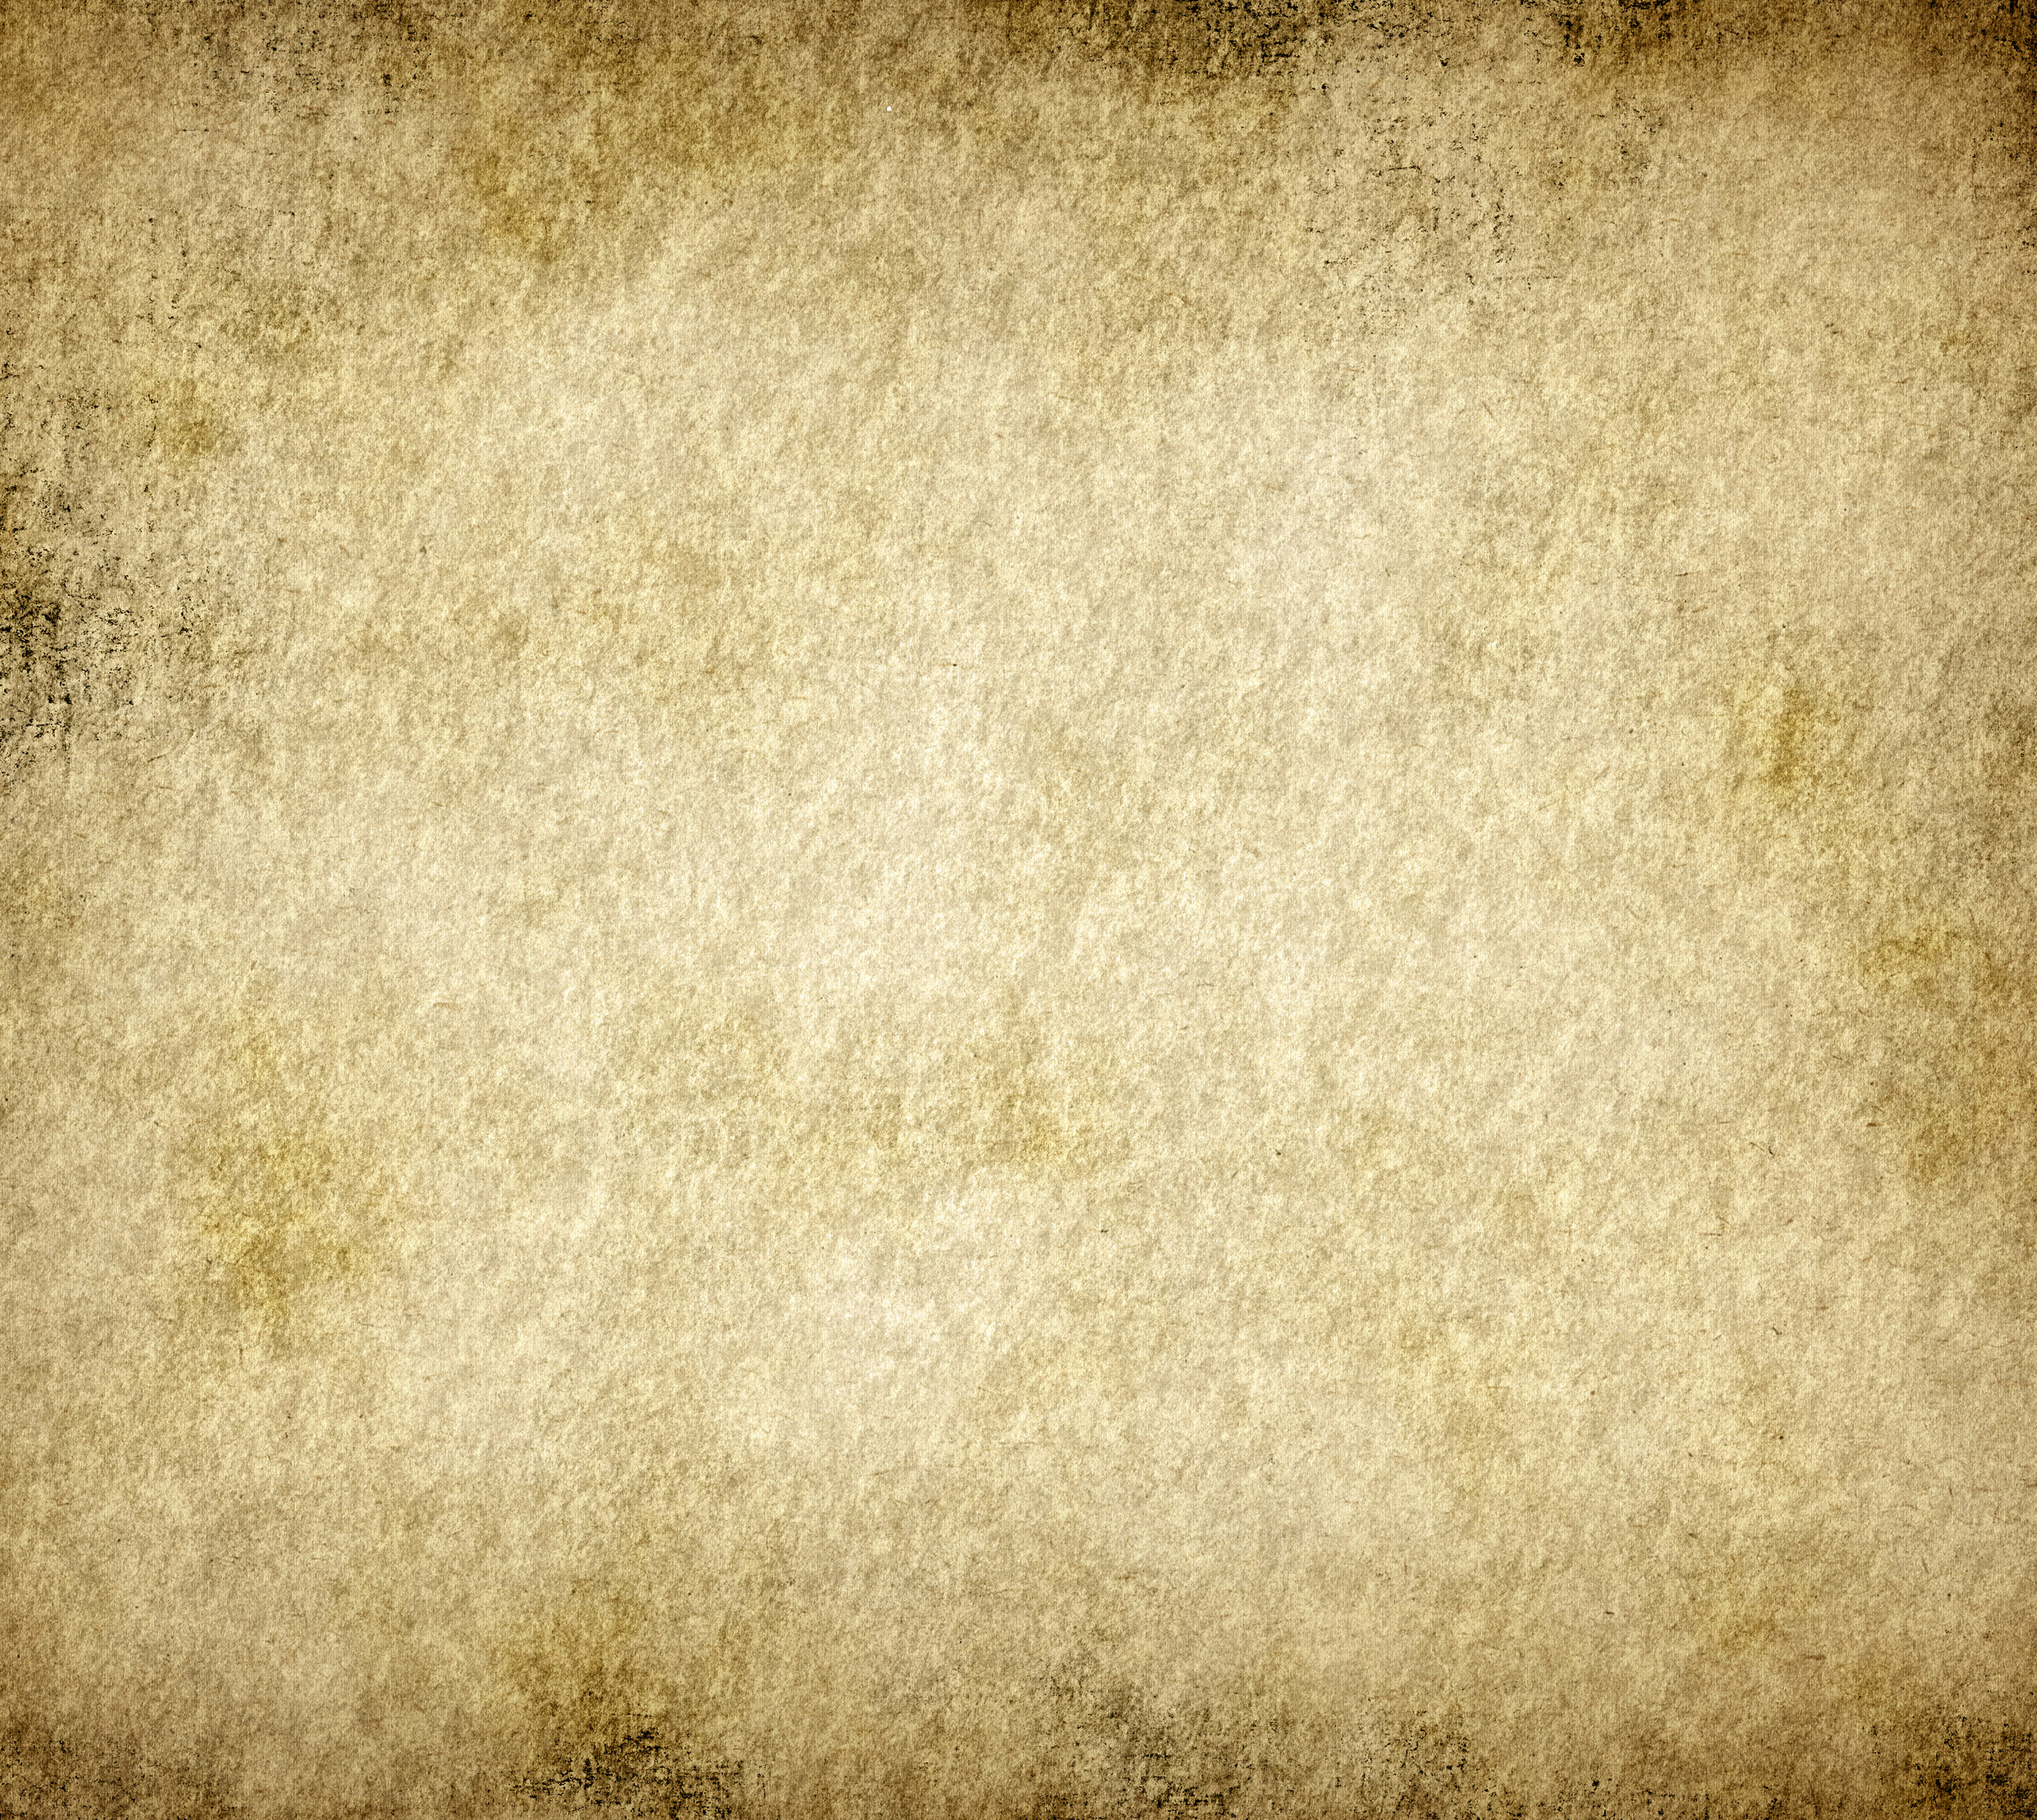 Paper Another Old Grunge Or Parchment Background Image An